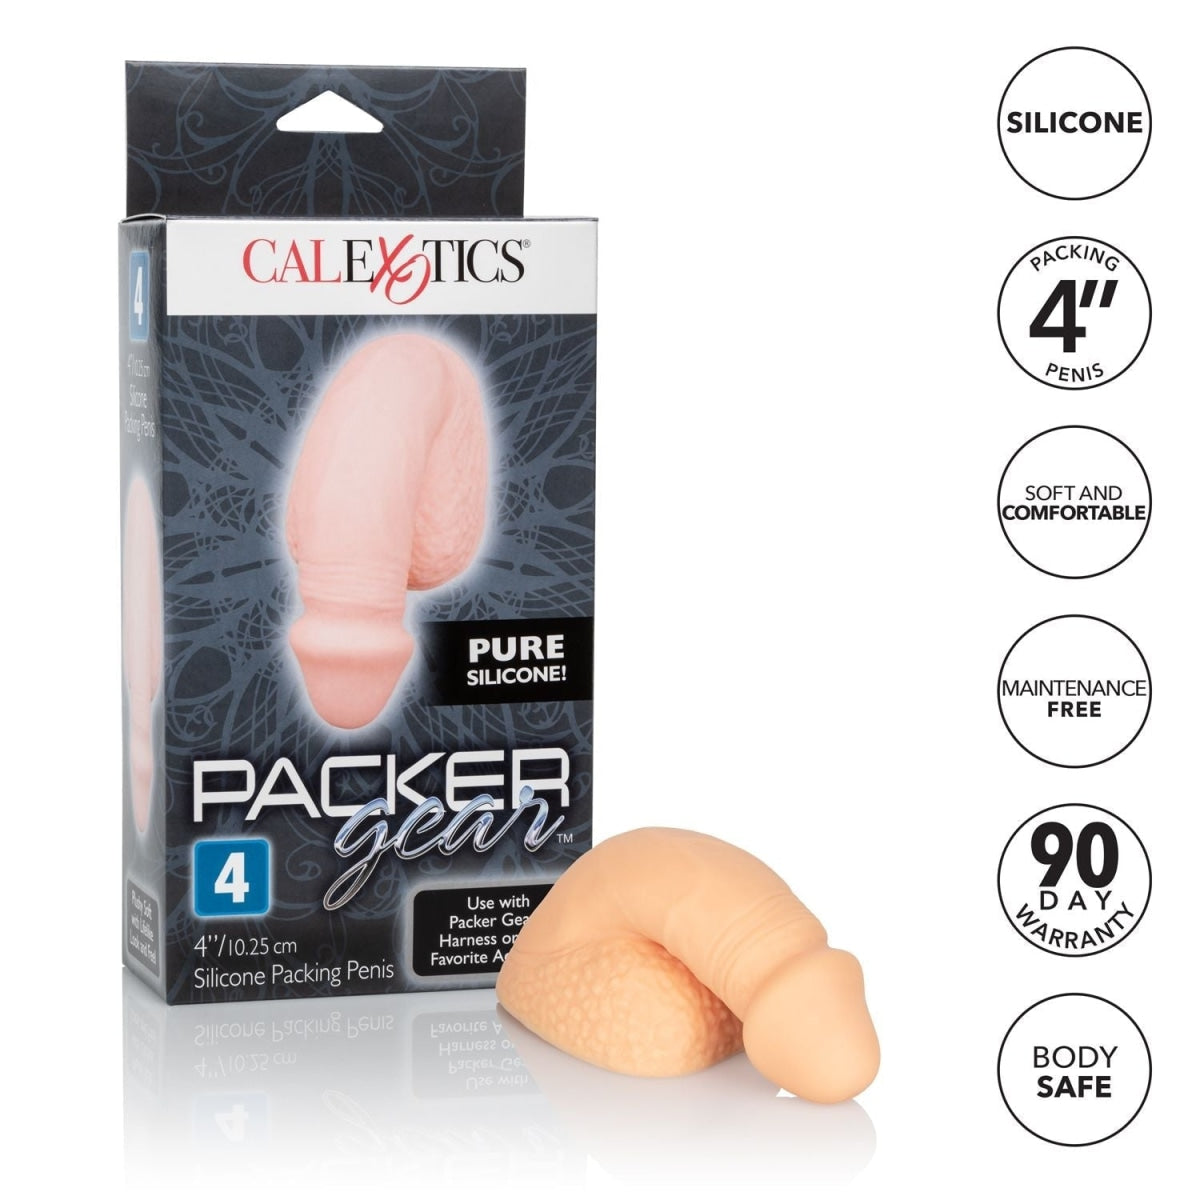 Packer Gear 4in Silicone Penis Ivory Intimates Adult Boutique